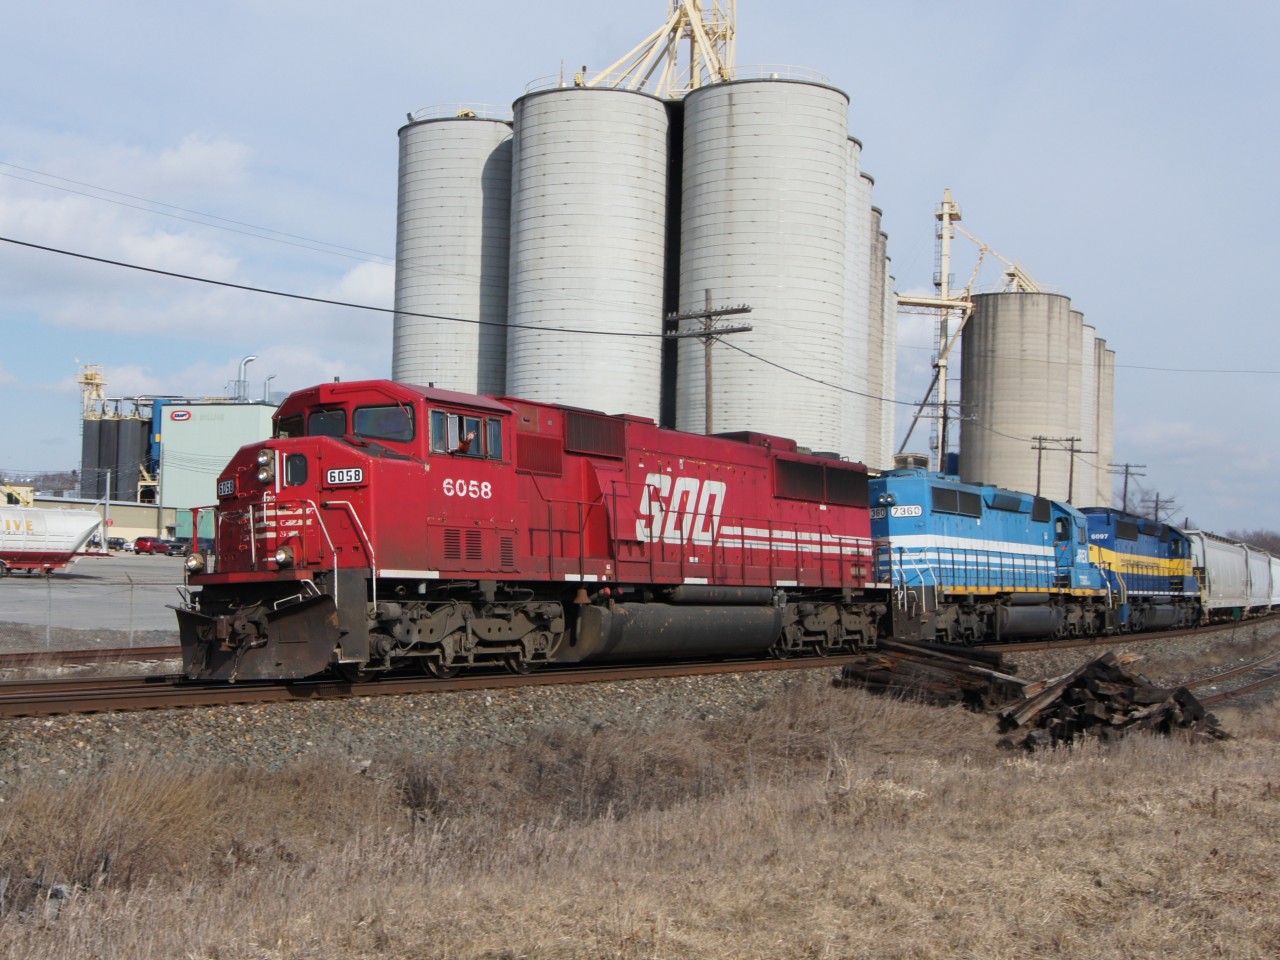 With a wave from the conductor, SOO 6058 leads NREX 7360 and DME 6097 westbound past ADM Milling. Having just crossed the Credit River, the train would soon pass through Streetsville GO Station and by the yard at Streetsville Junction.